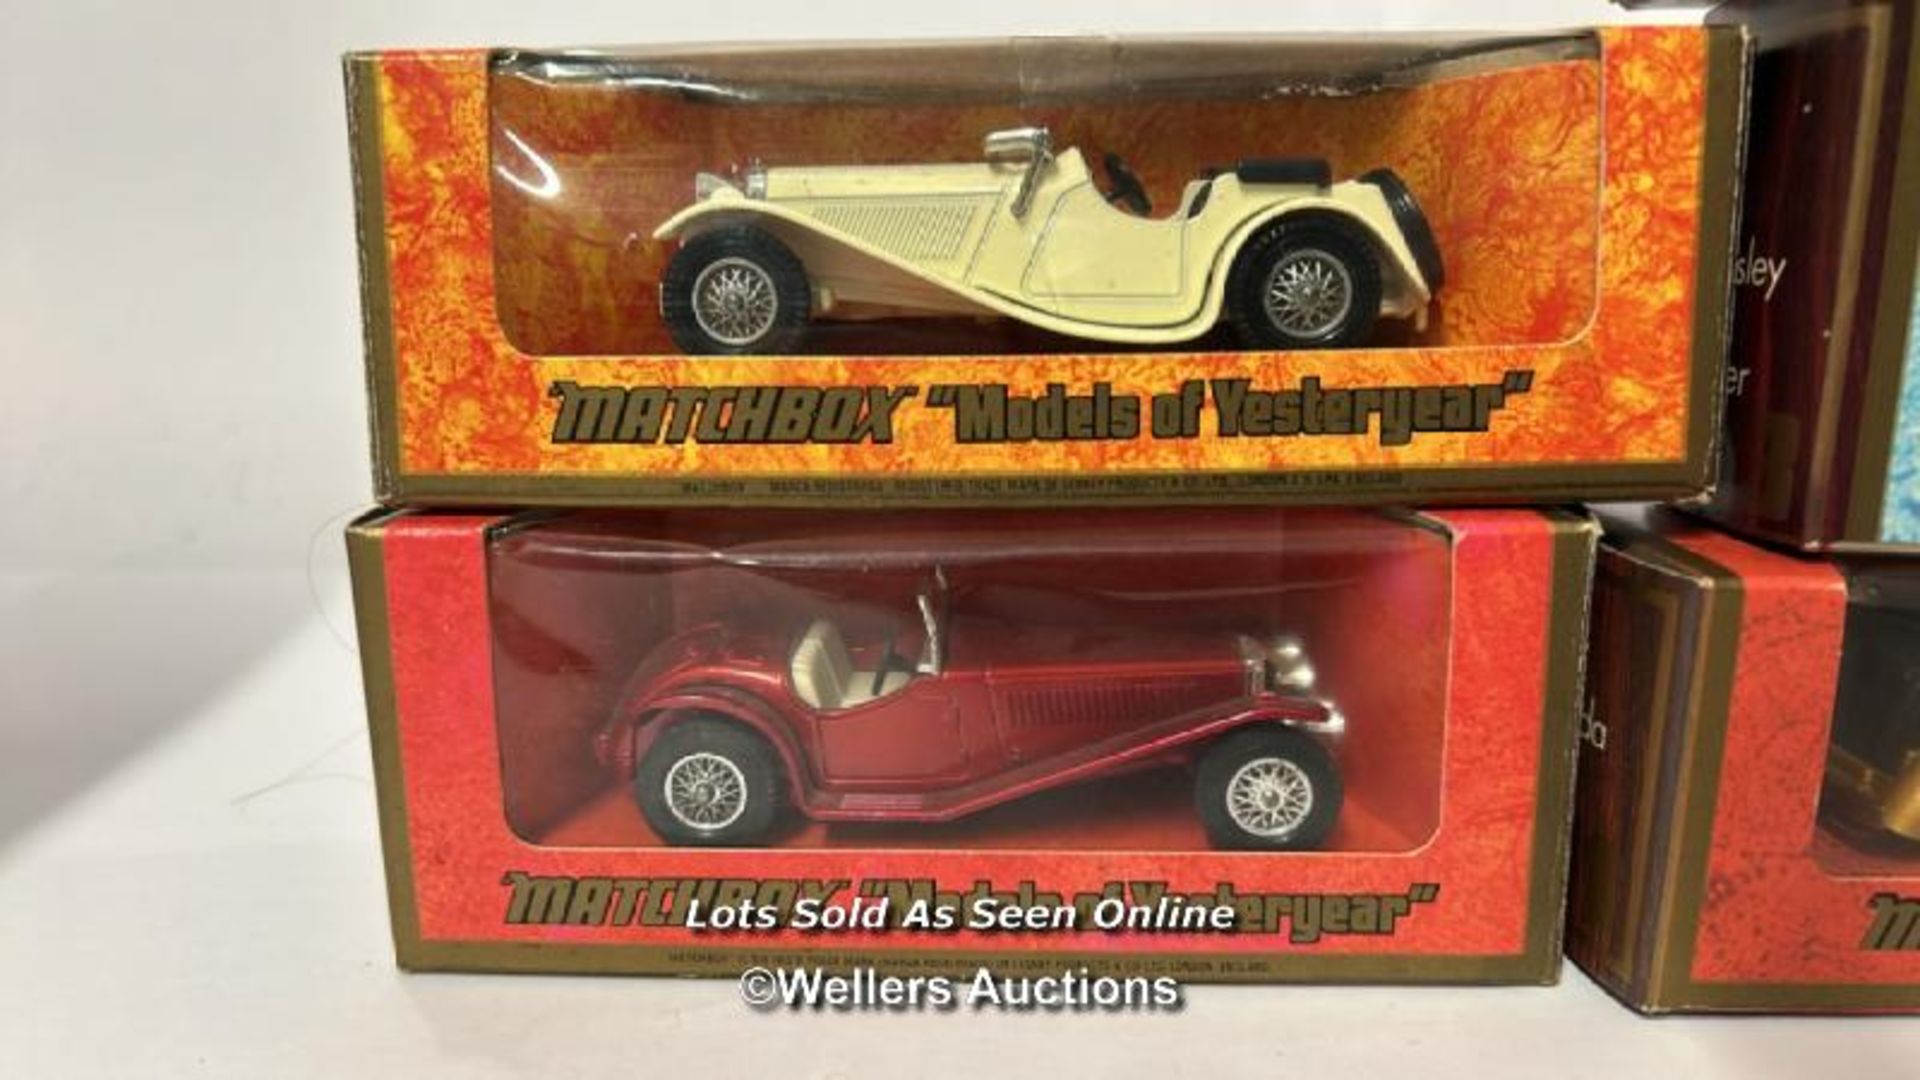 Group of seven boxed Matchbox Models of Yesteryear cars to include 1931 Stutz Bearcat - Image 2 of 5